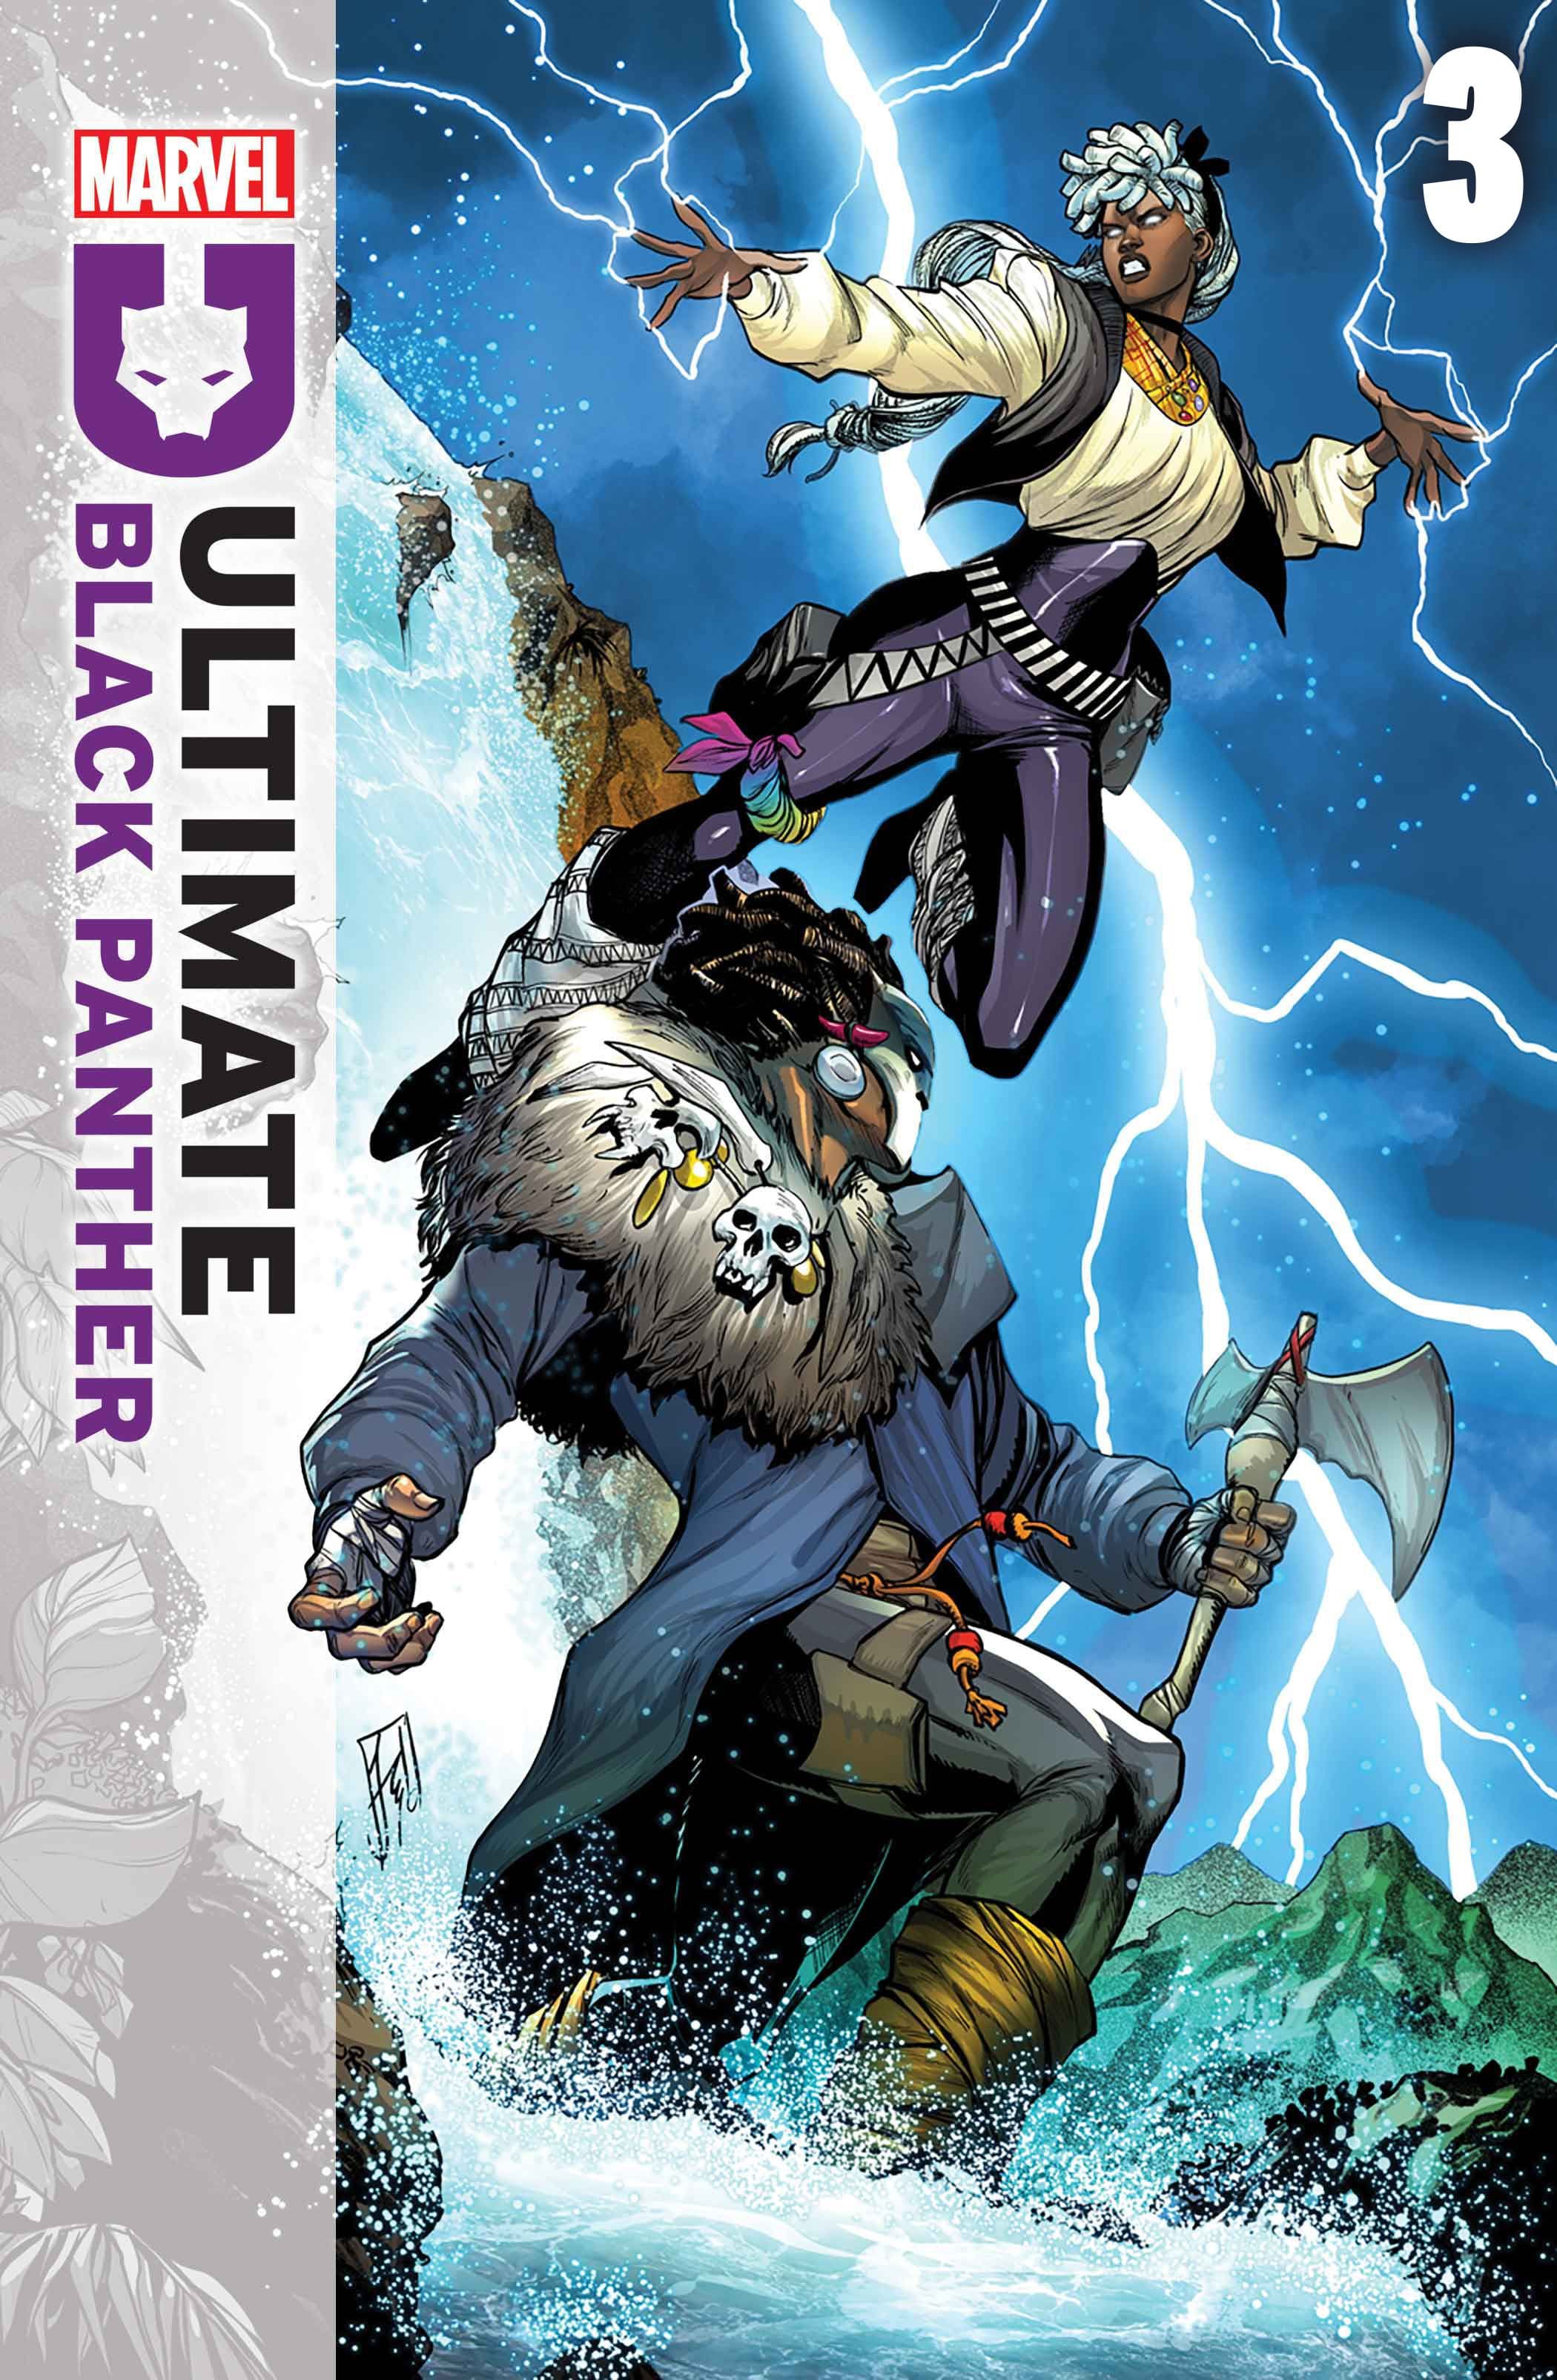 New Storm & Killmonger Revealed, as Marvel Reboots Black Panther Lore for Ultimate Universe